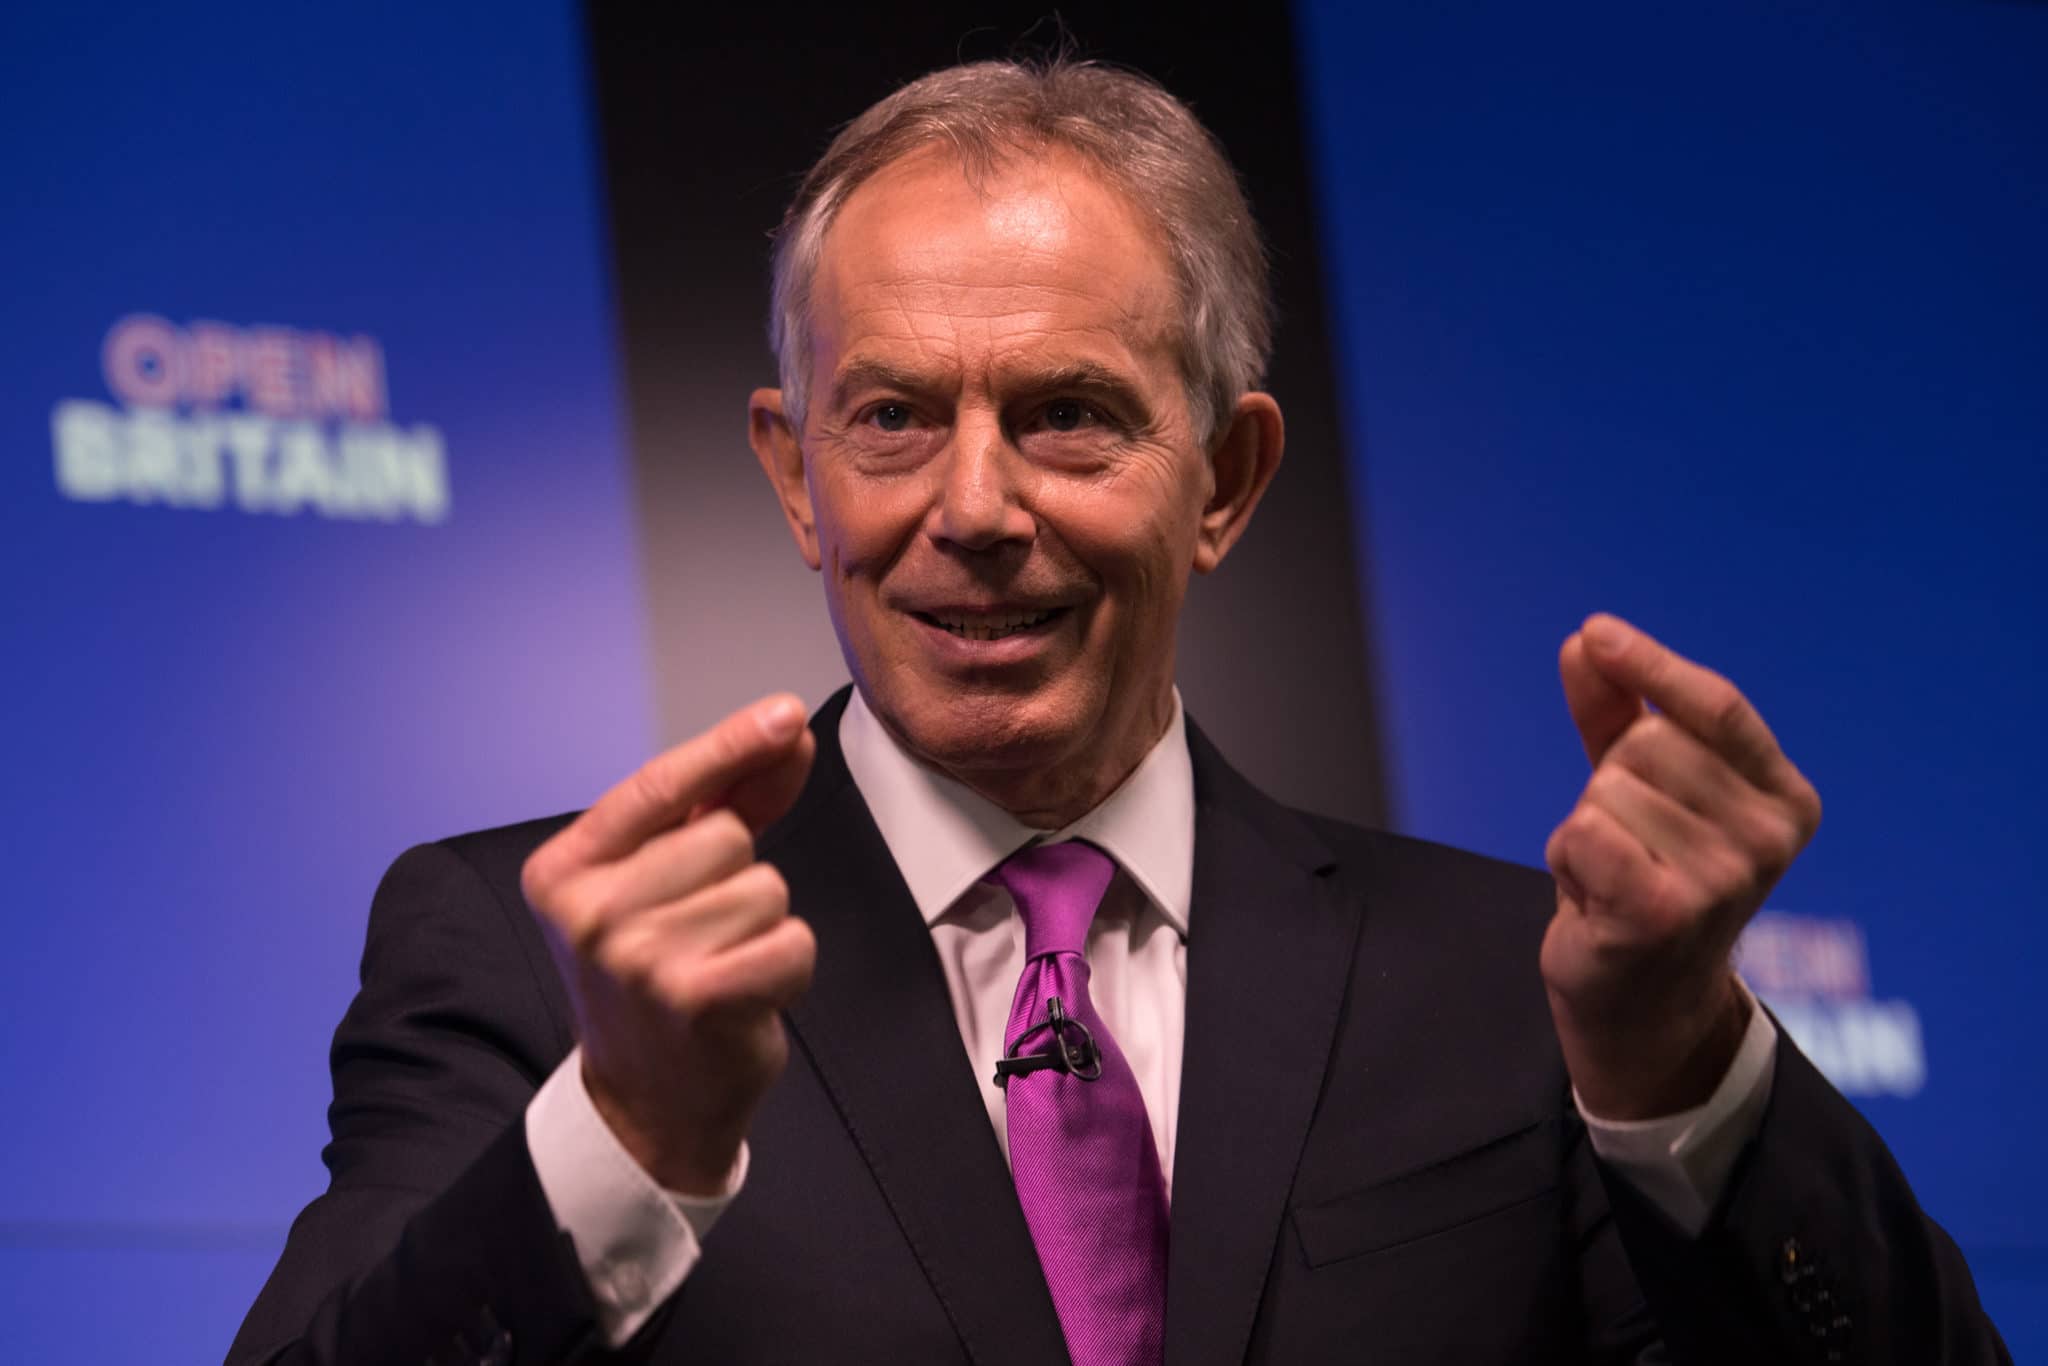 Tony Blair: How the misery of COVID-19 could mean more investment into Africa.